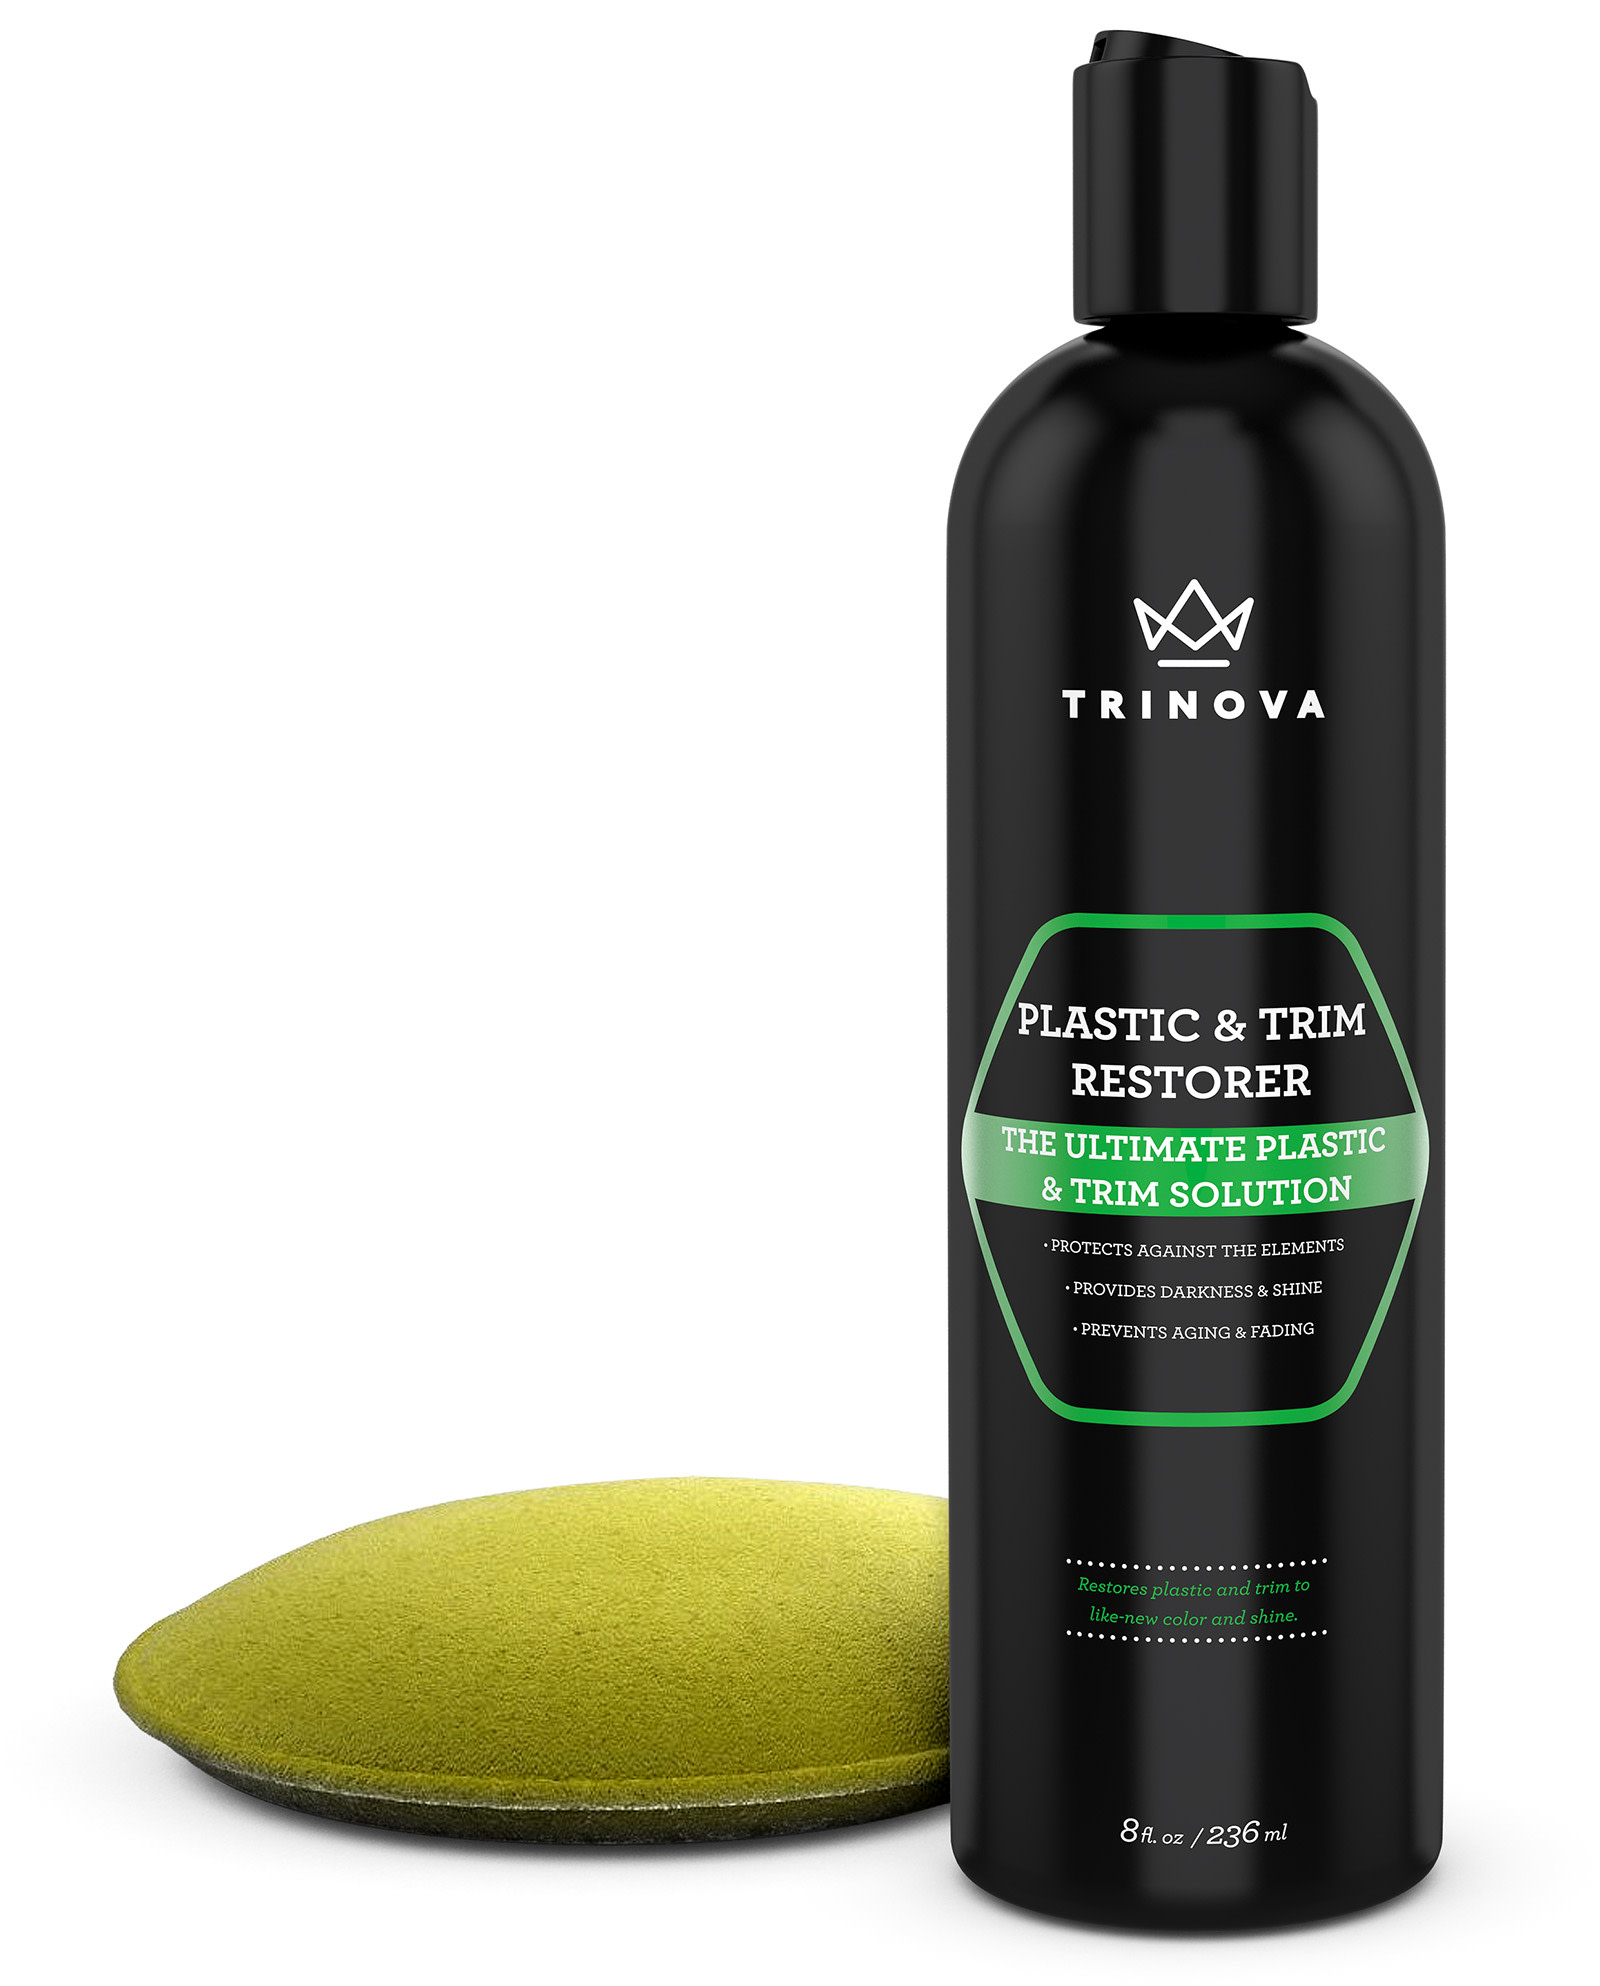 TriNova Plastic & Trim Restorer - Shines & Darkens Worn Out Plastic, Vinyl & Rubber Surfaces - Protects Cars & Motorcycles from Rain, Salt & Dirt - Prevent Fading - 8 OZ - image 1 of 11